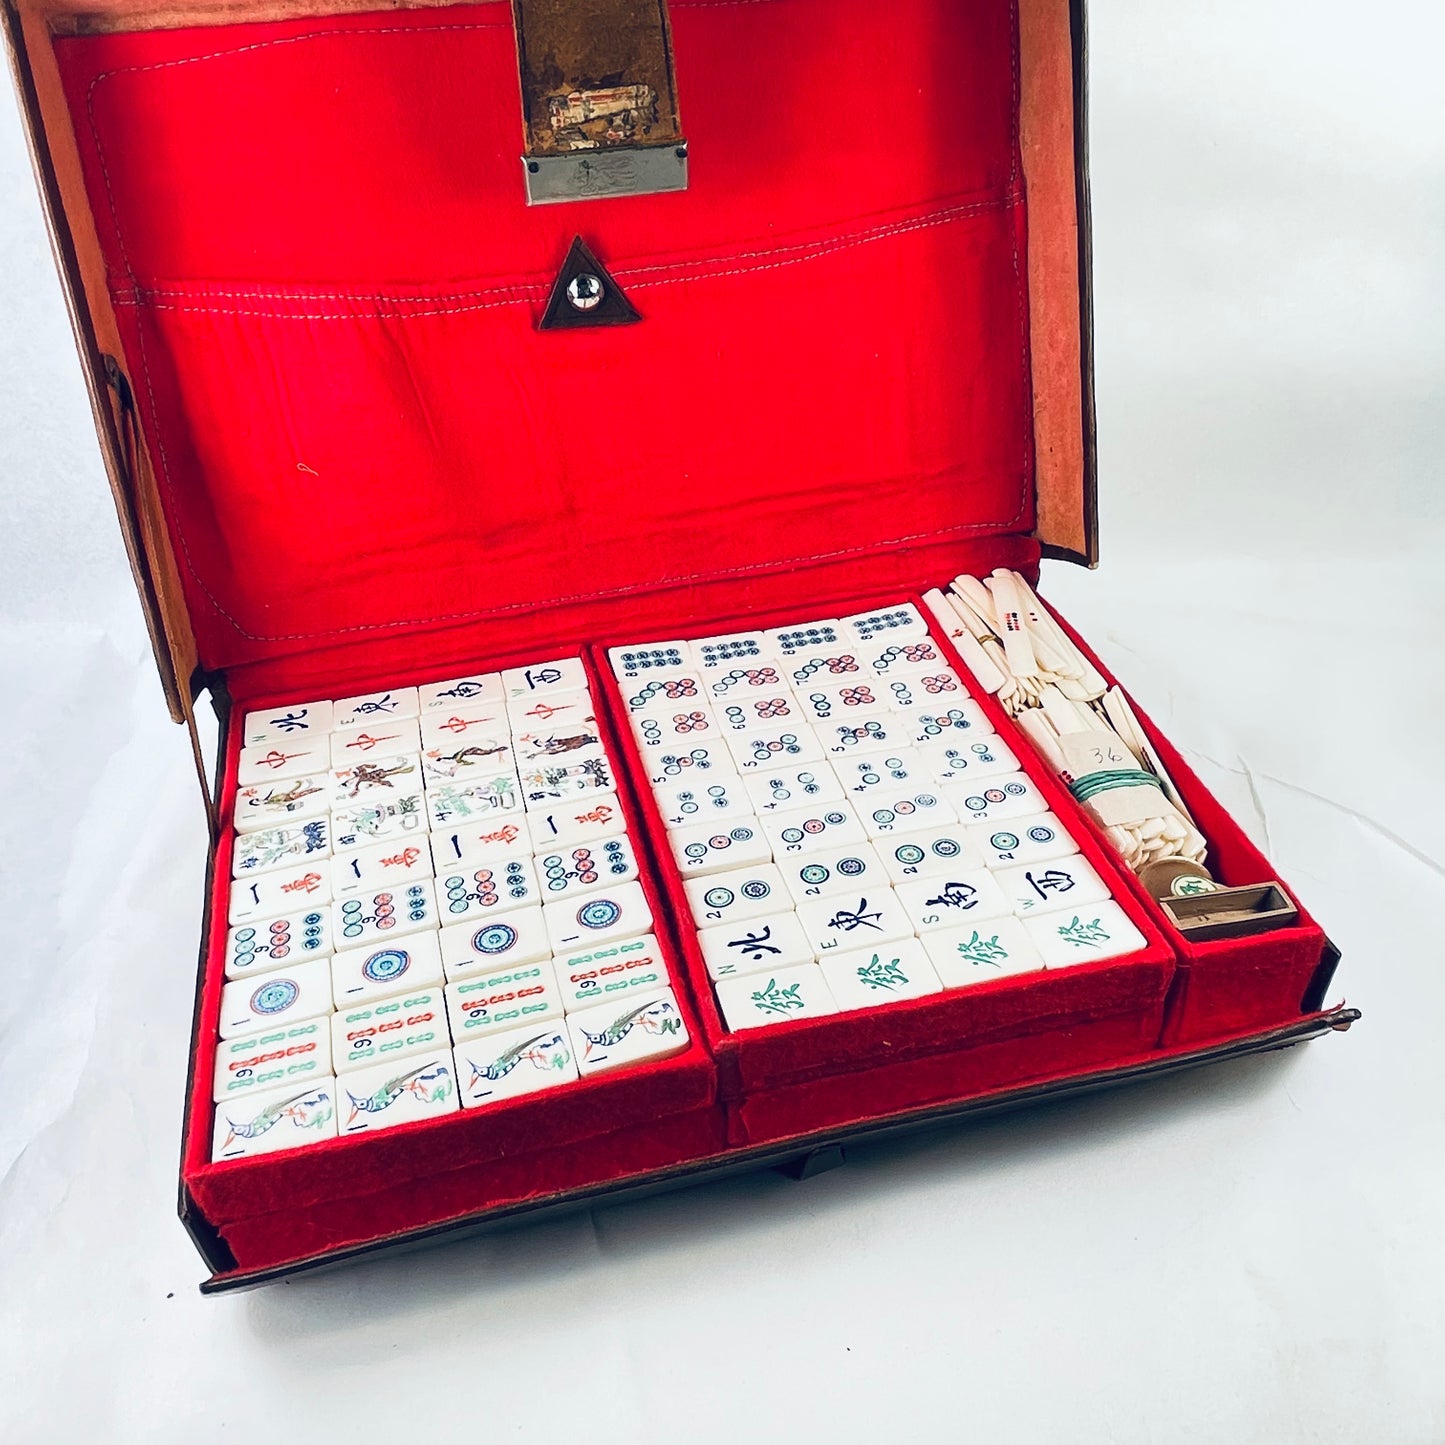 Antique Complete Chinese Mahjong Set With Arabic Numerals 1x 2 x 3 cm Tiles Special Tiles are Maidens Box Includes Betting Sticks Dice w/ Box as well as Direction Disks and holder